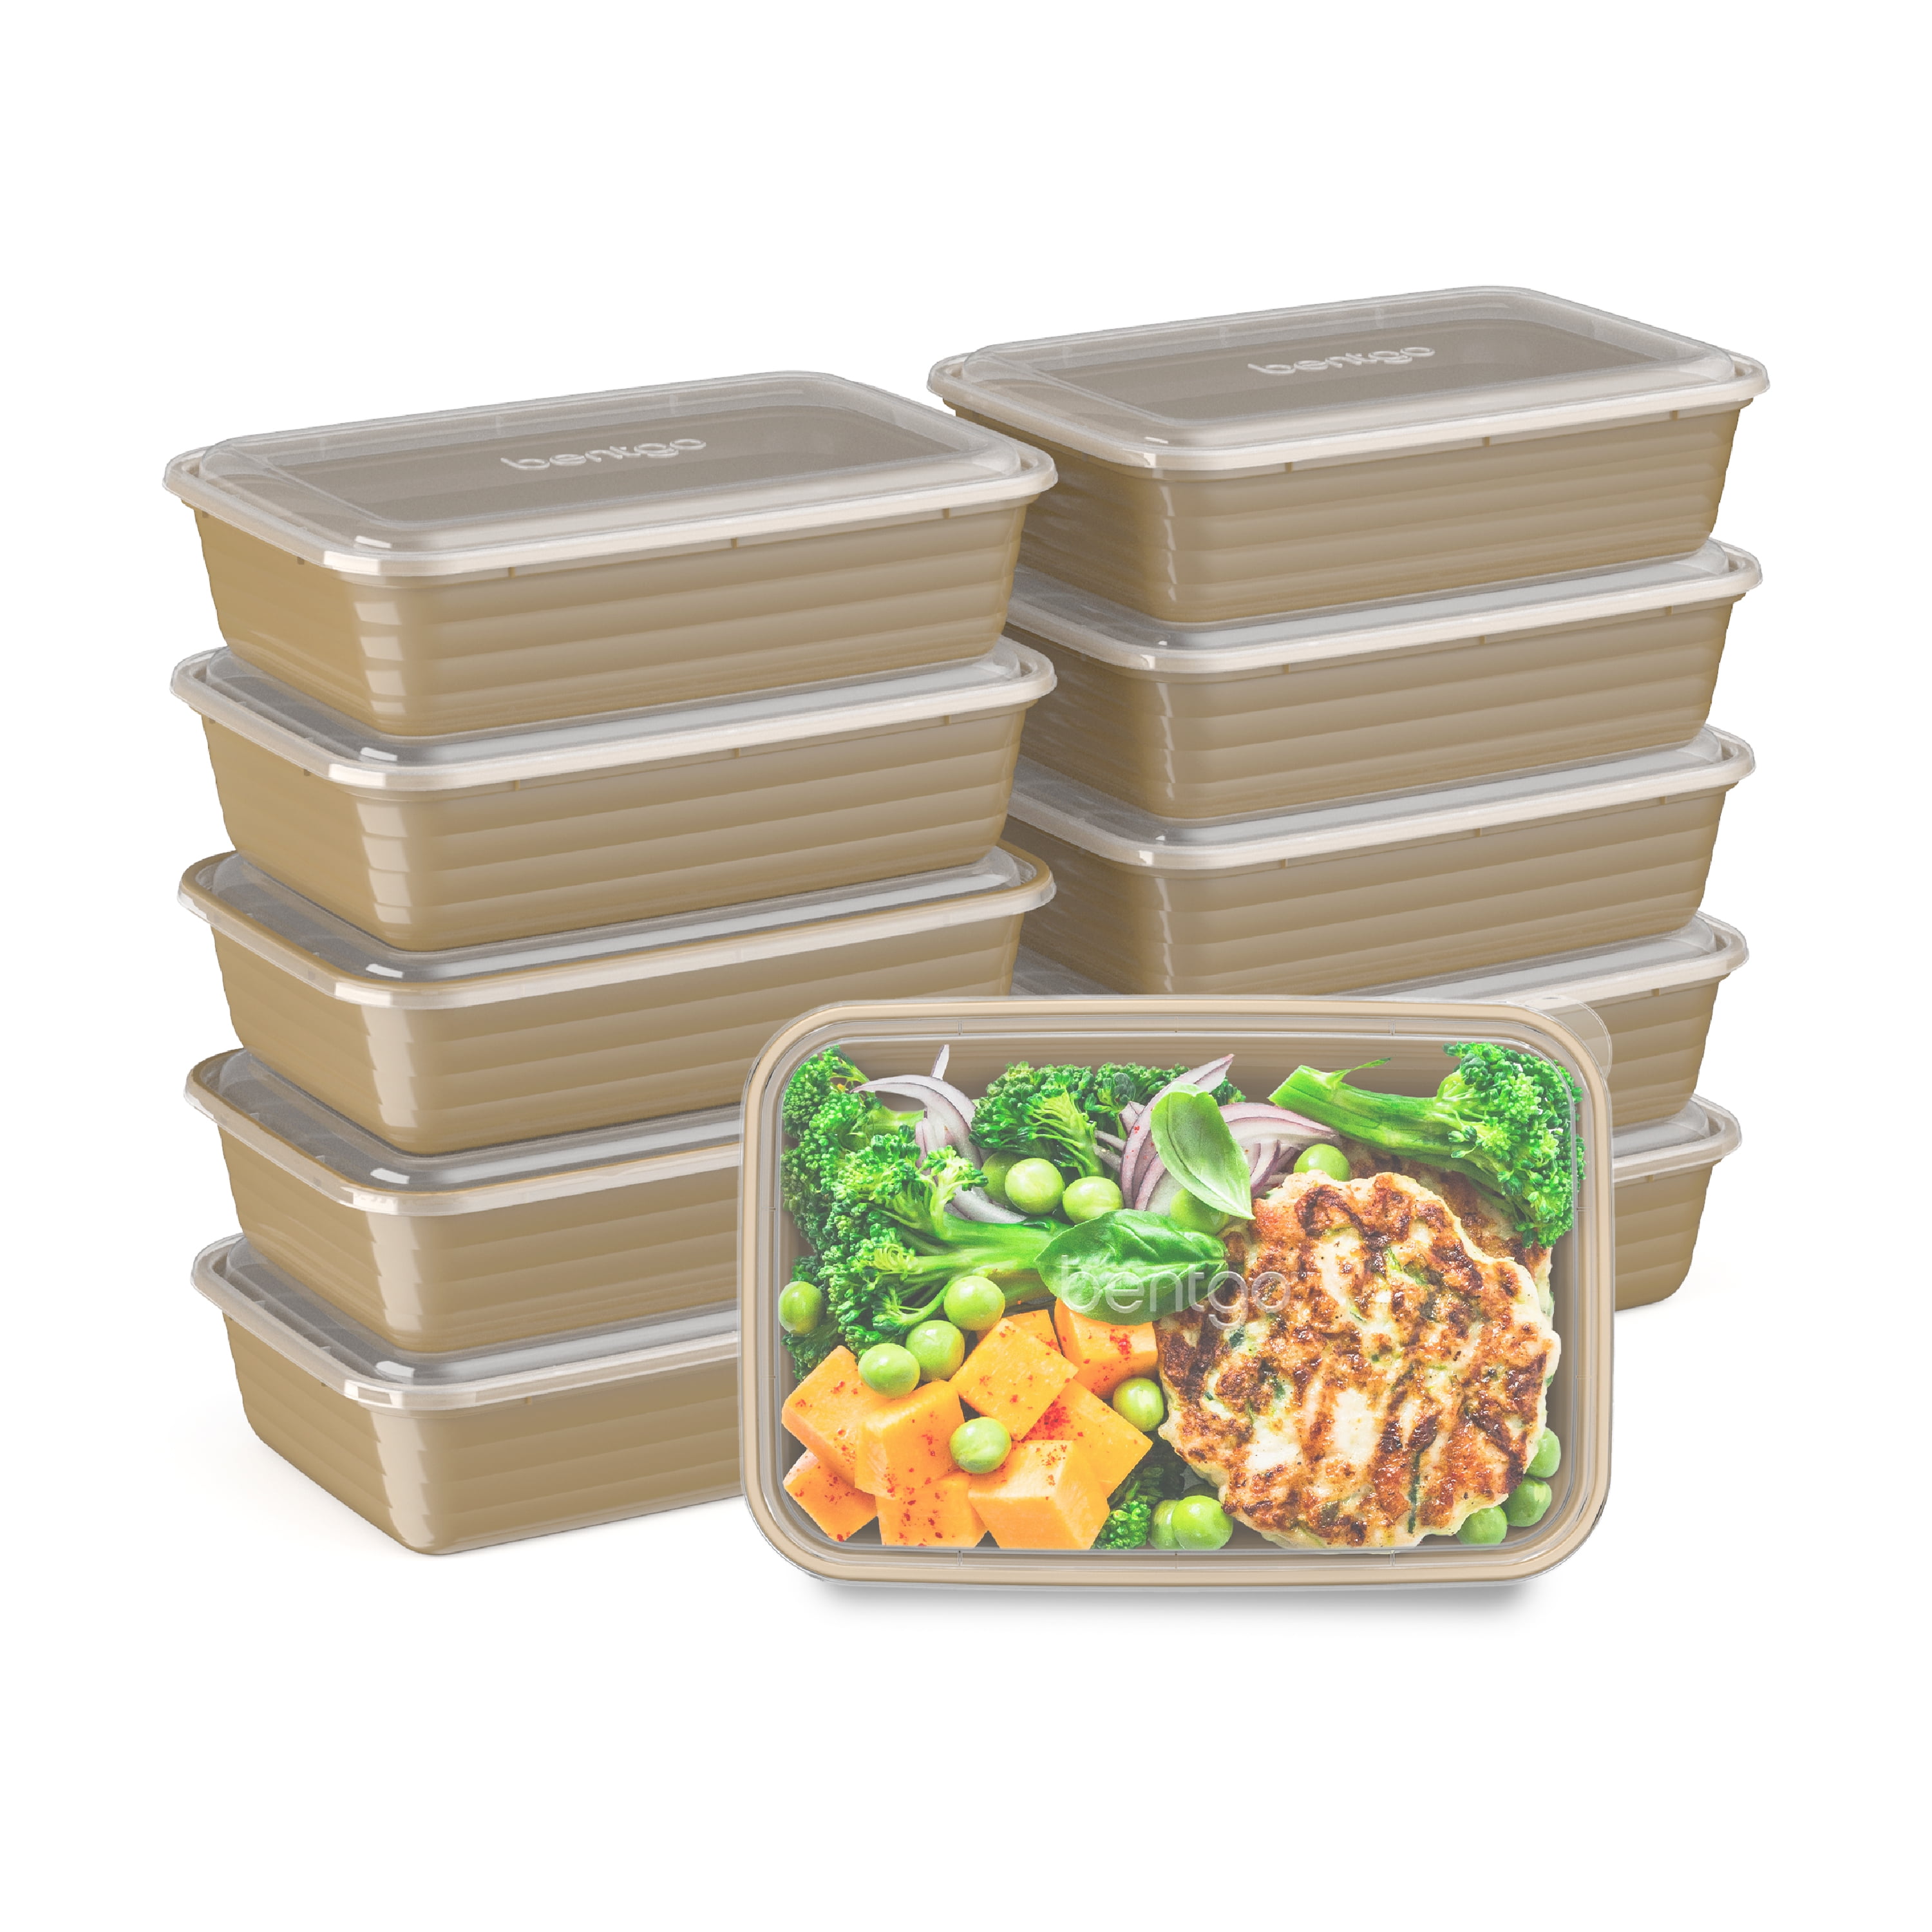 INEVIFIT Meal Prep Single Compartment BPA Free, Premium Food Storage Containers, Durable & Reusable, 28 oz. Stackable 10 Pack, Microwaveable